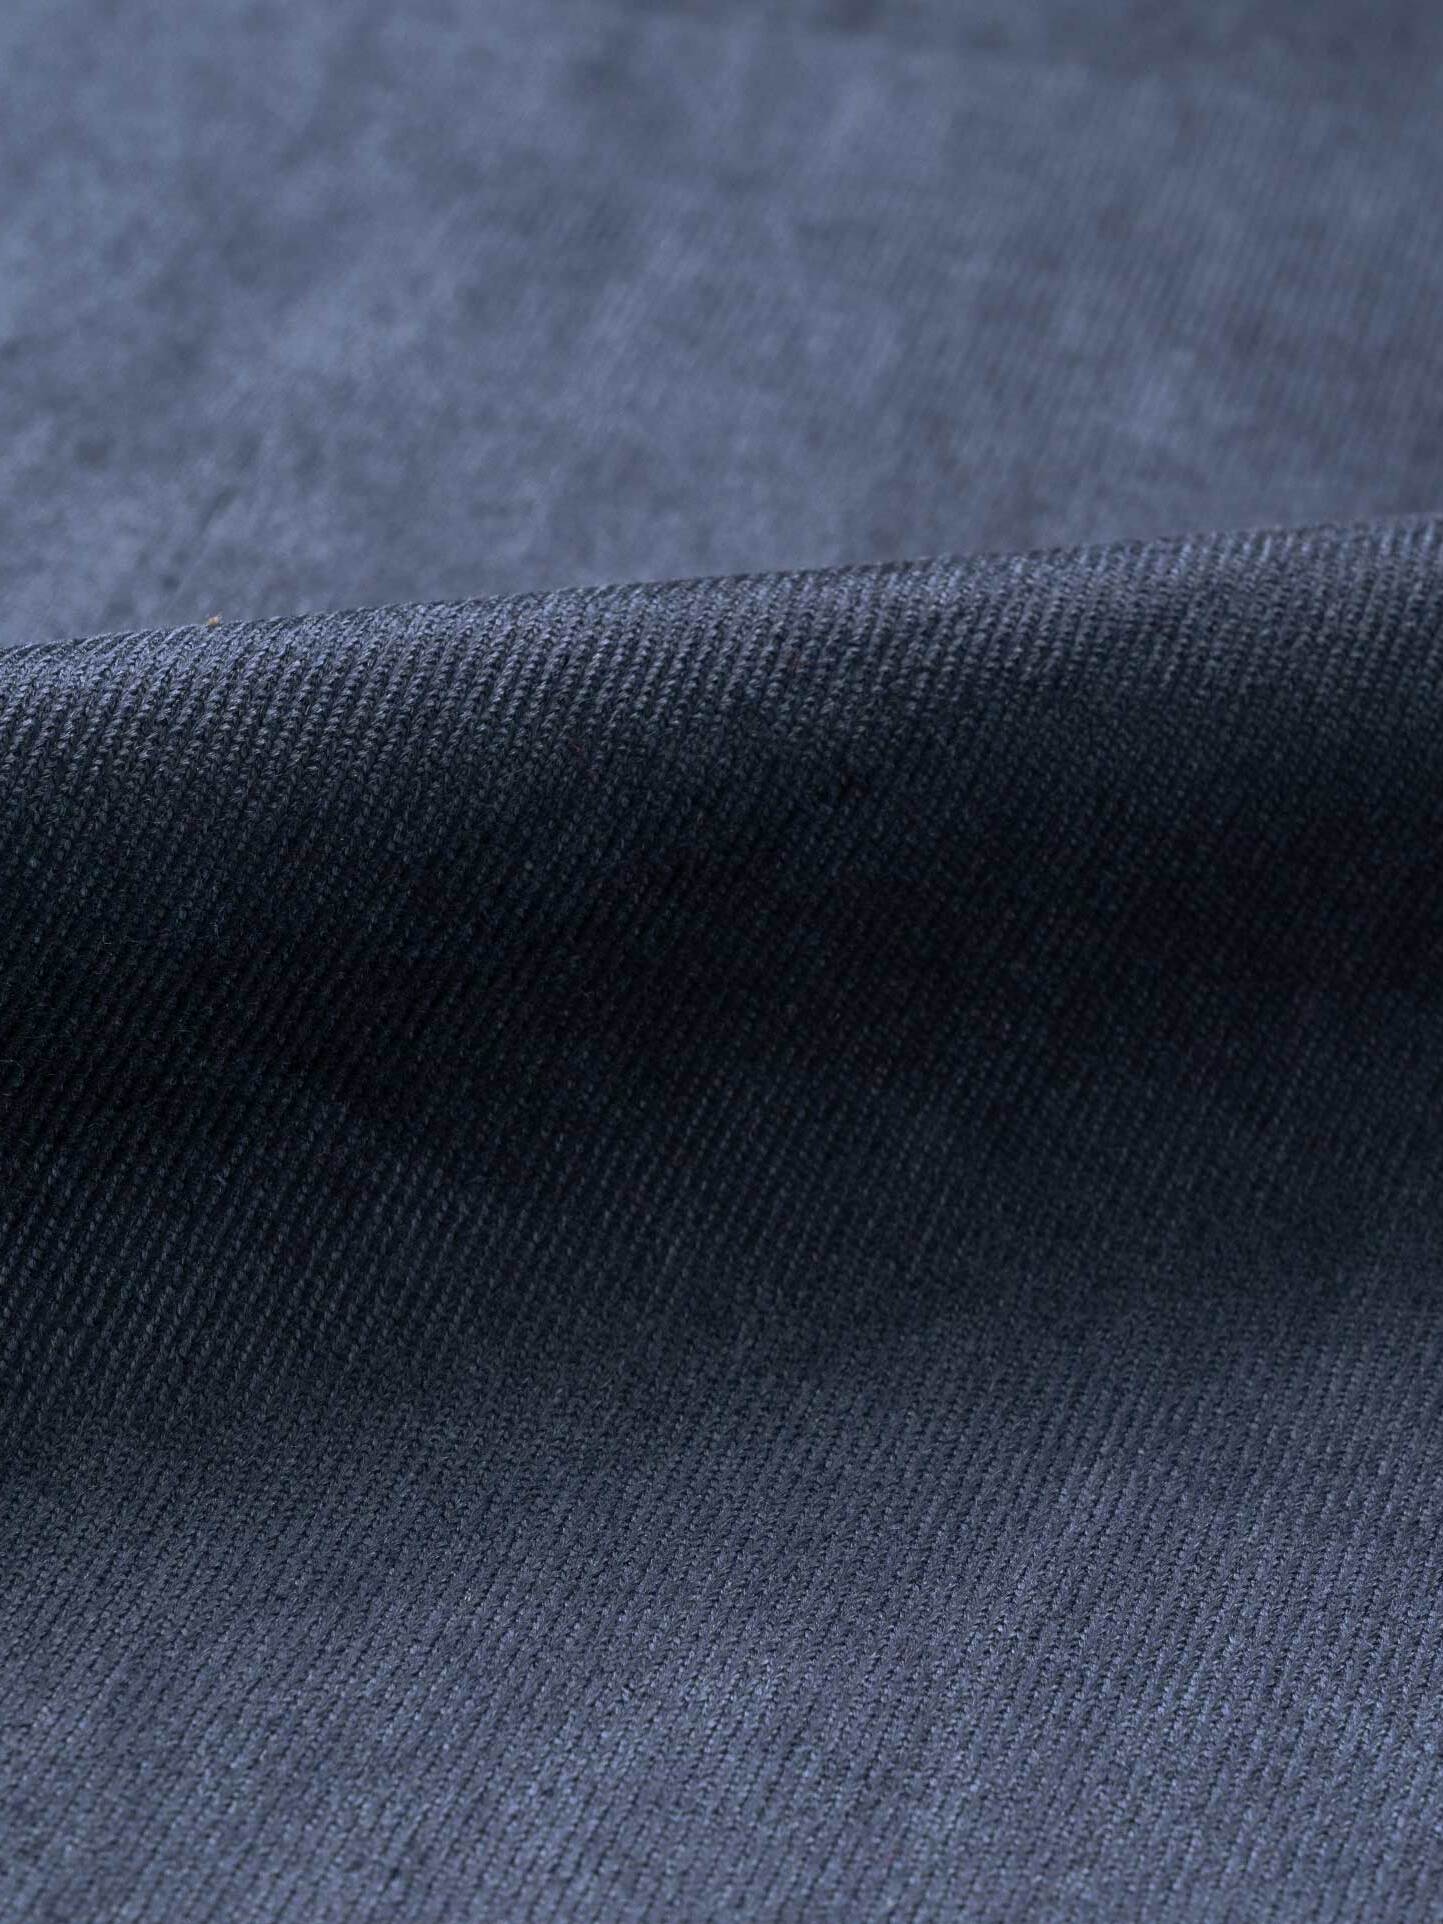 Faded Navy Cotton Lyocell Stretch Corduroy Shirts by Proper Cloth